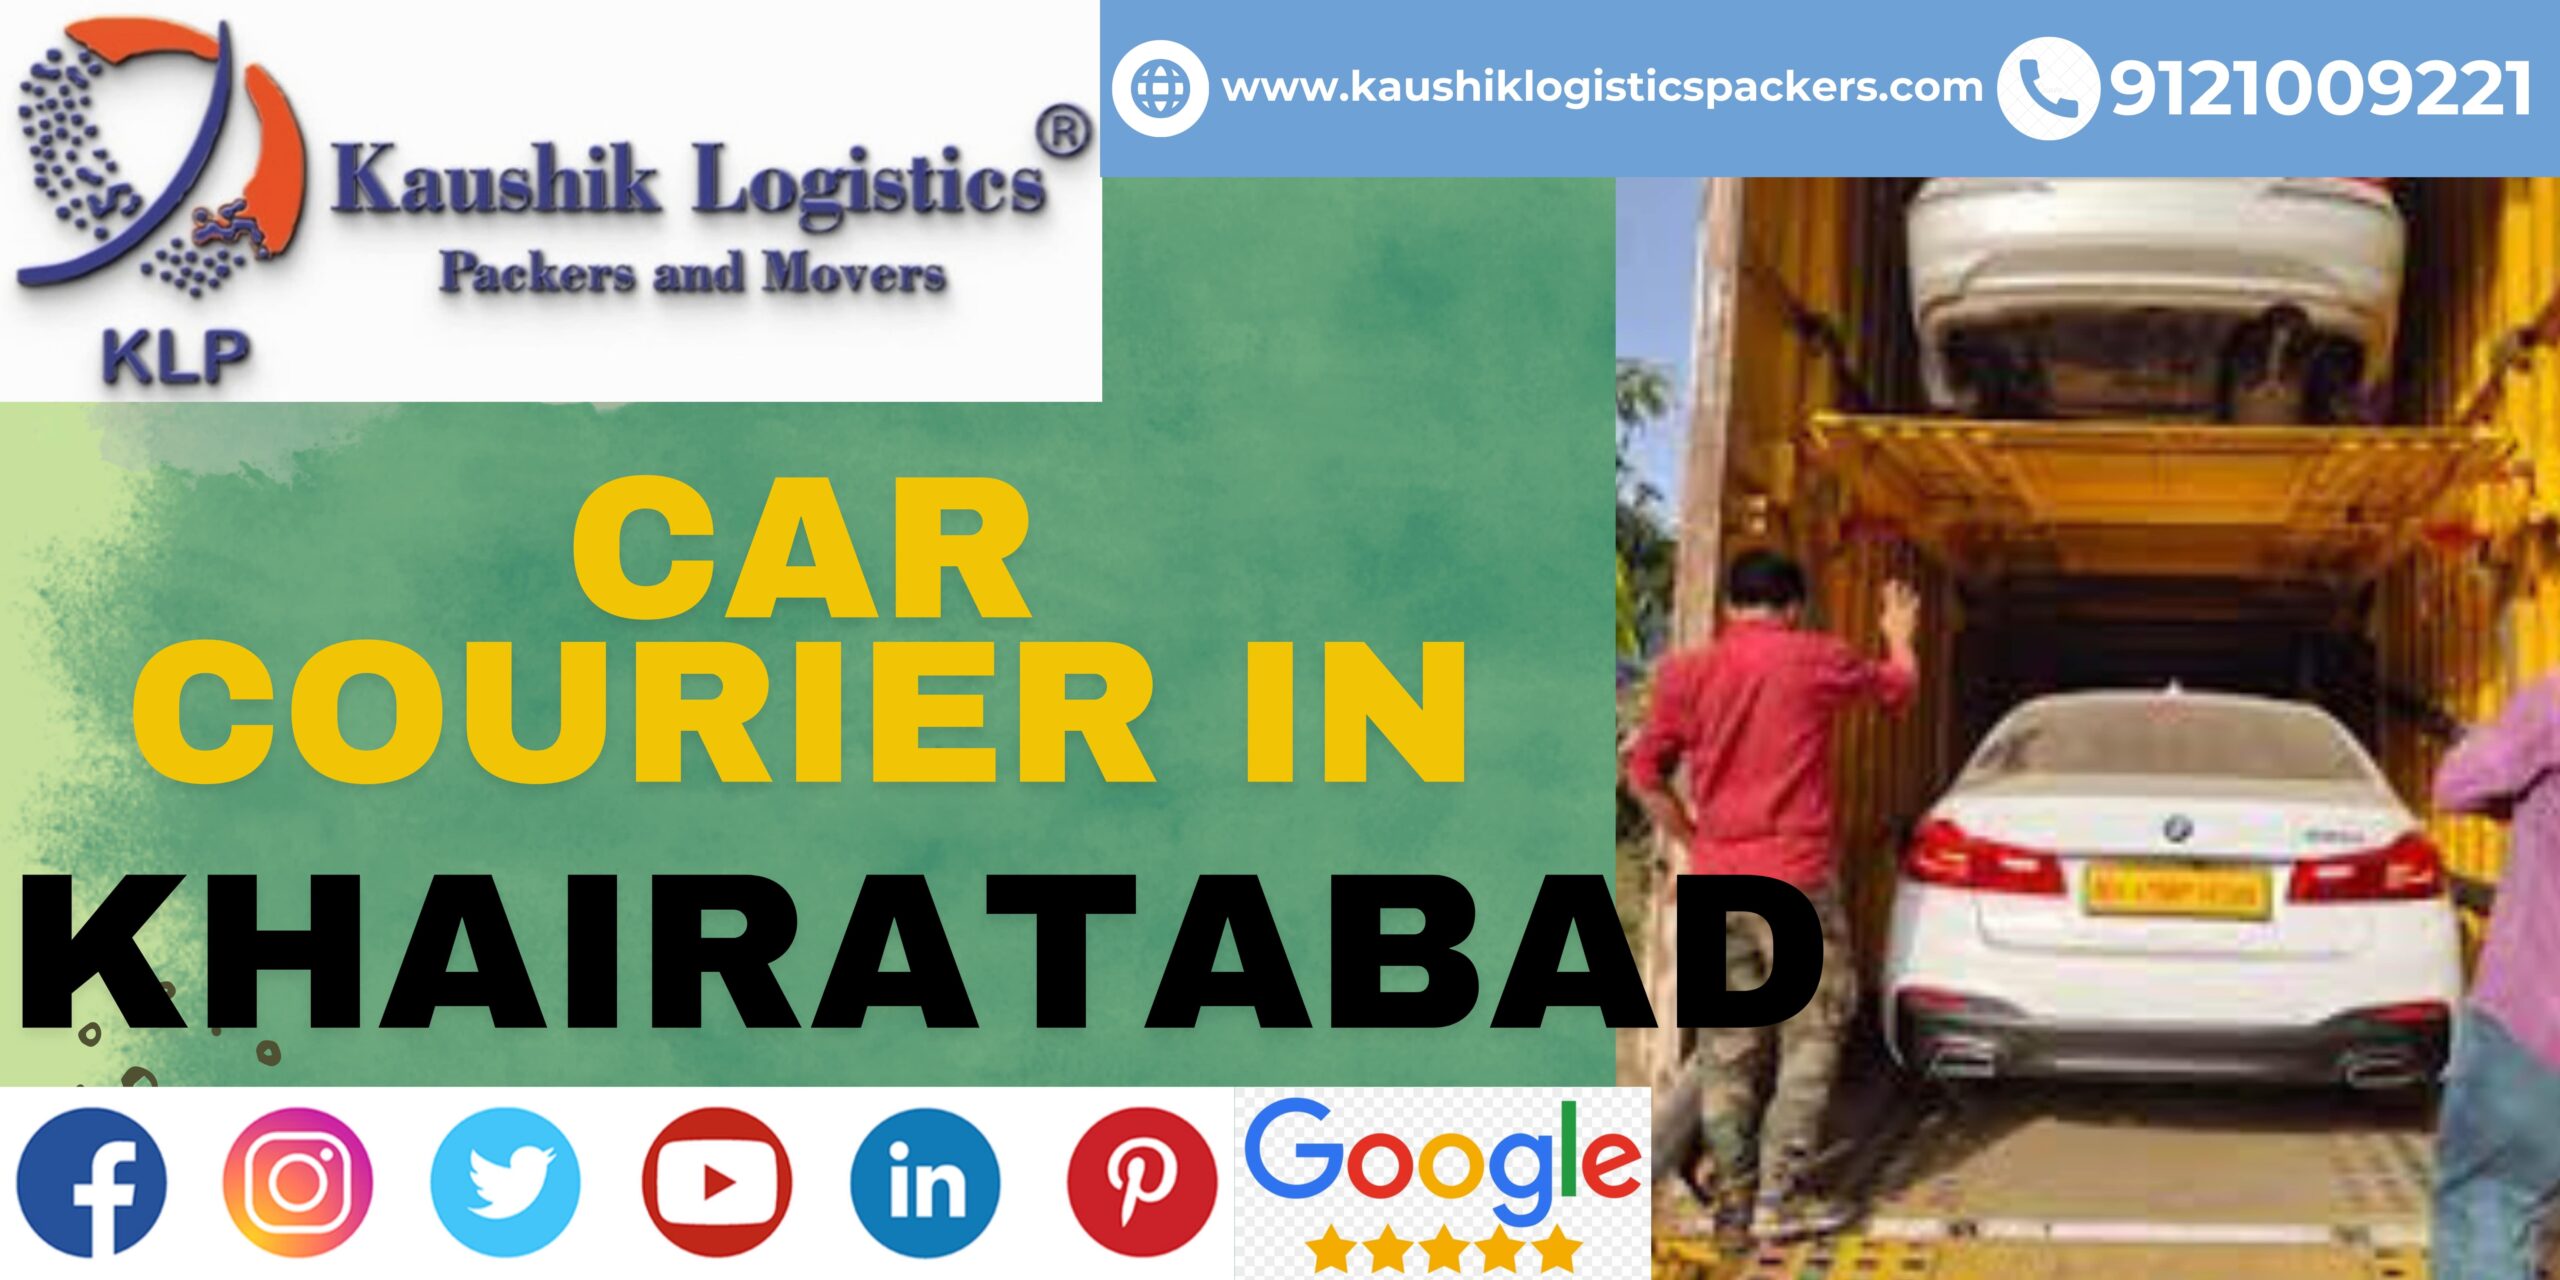 Packers and Movers In Khairatabad